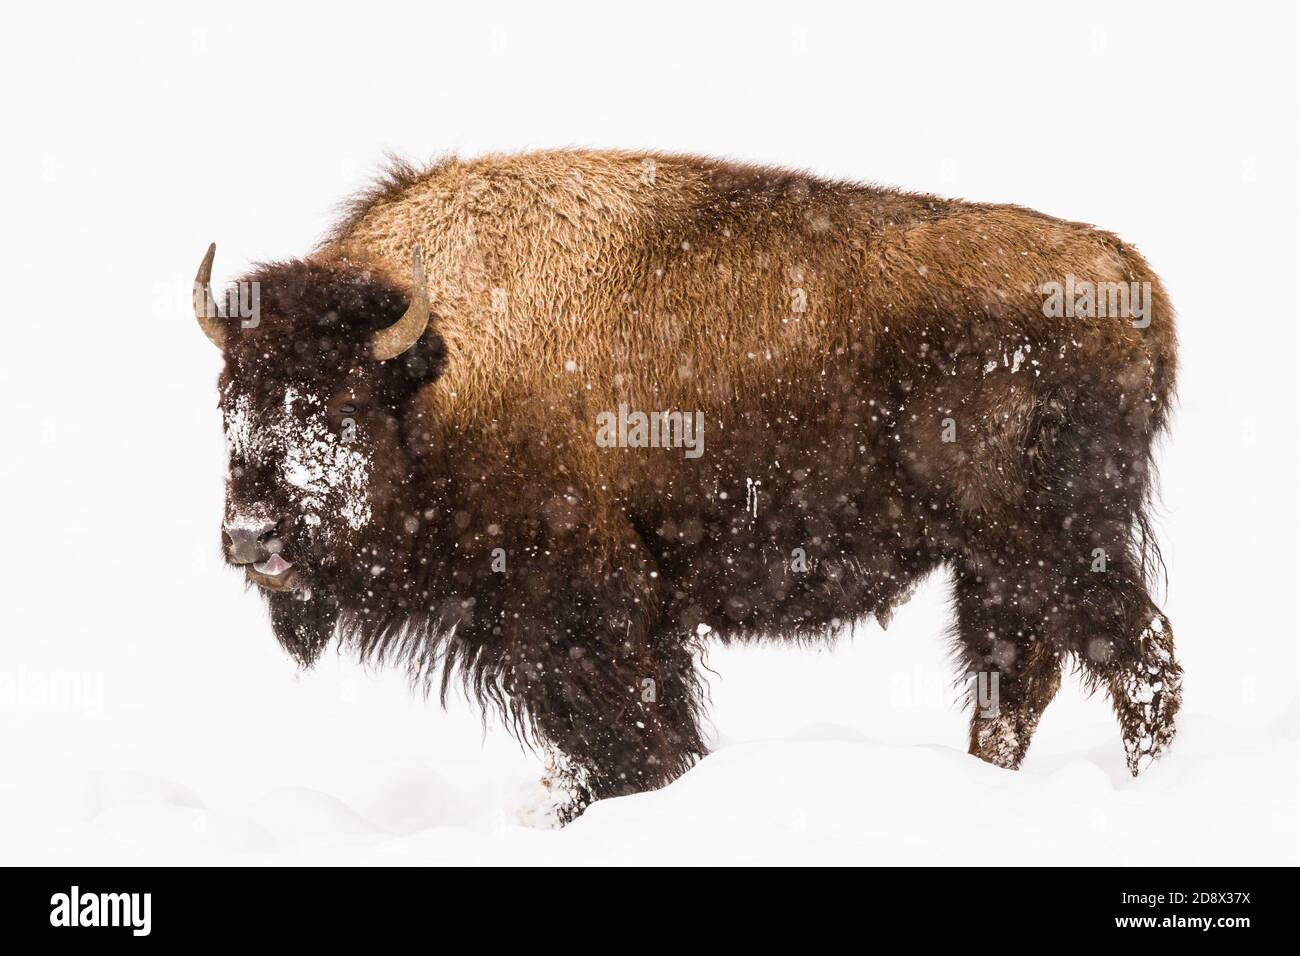 An American bison in a snowstorm in Yellowstone National Park, Wyoming, USA. Stock Photo